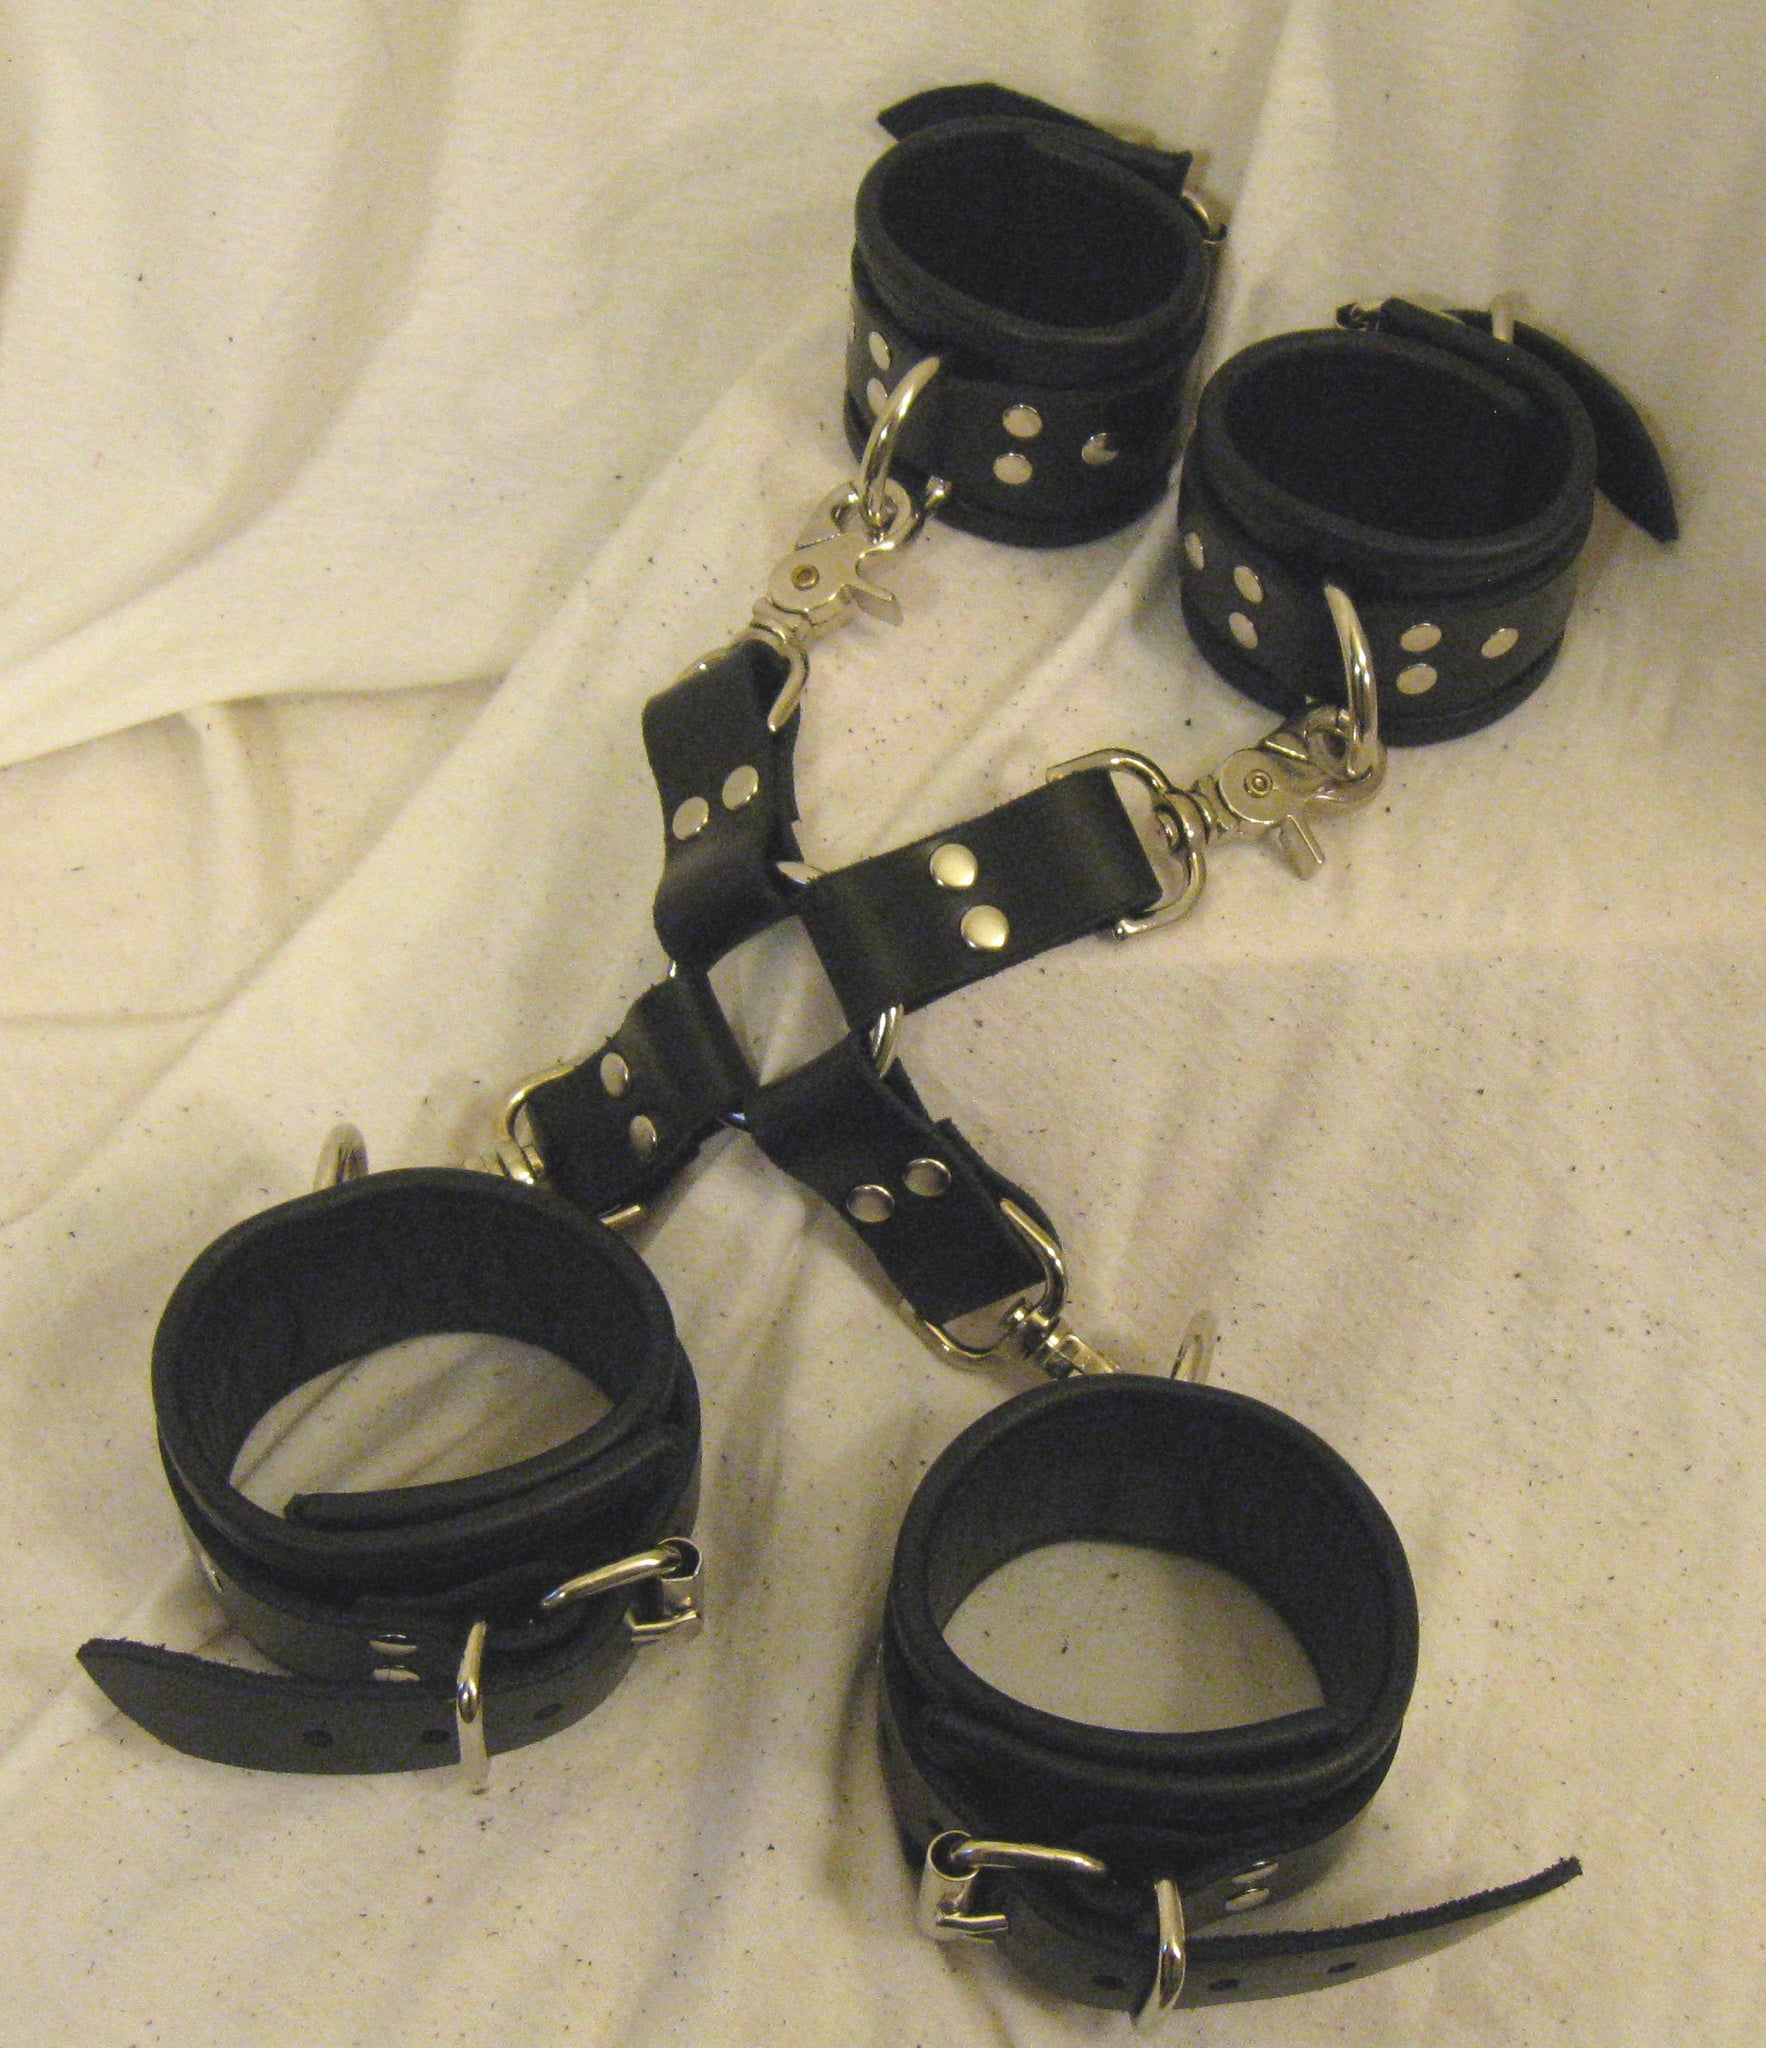 Matching Leather Wrist/Ankle Cuff Combos With Hogtie!